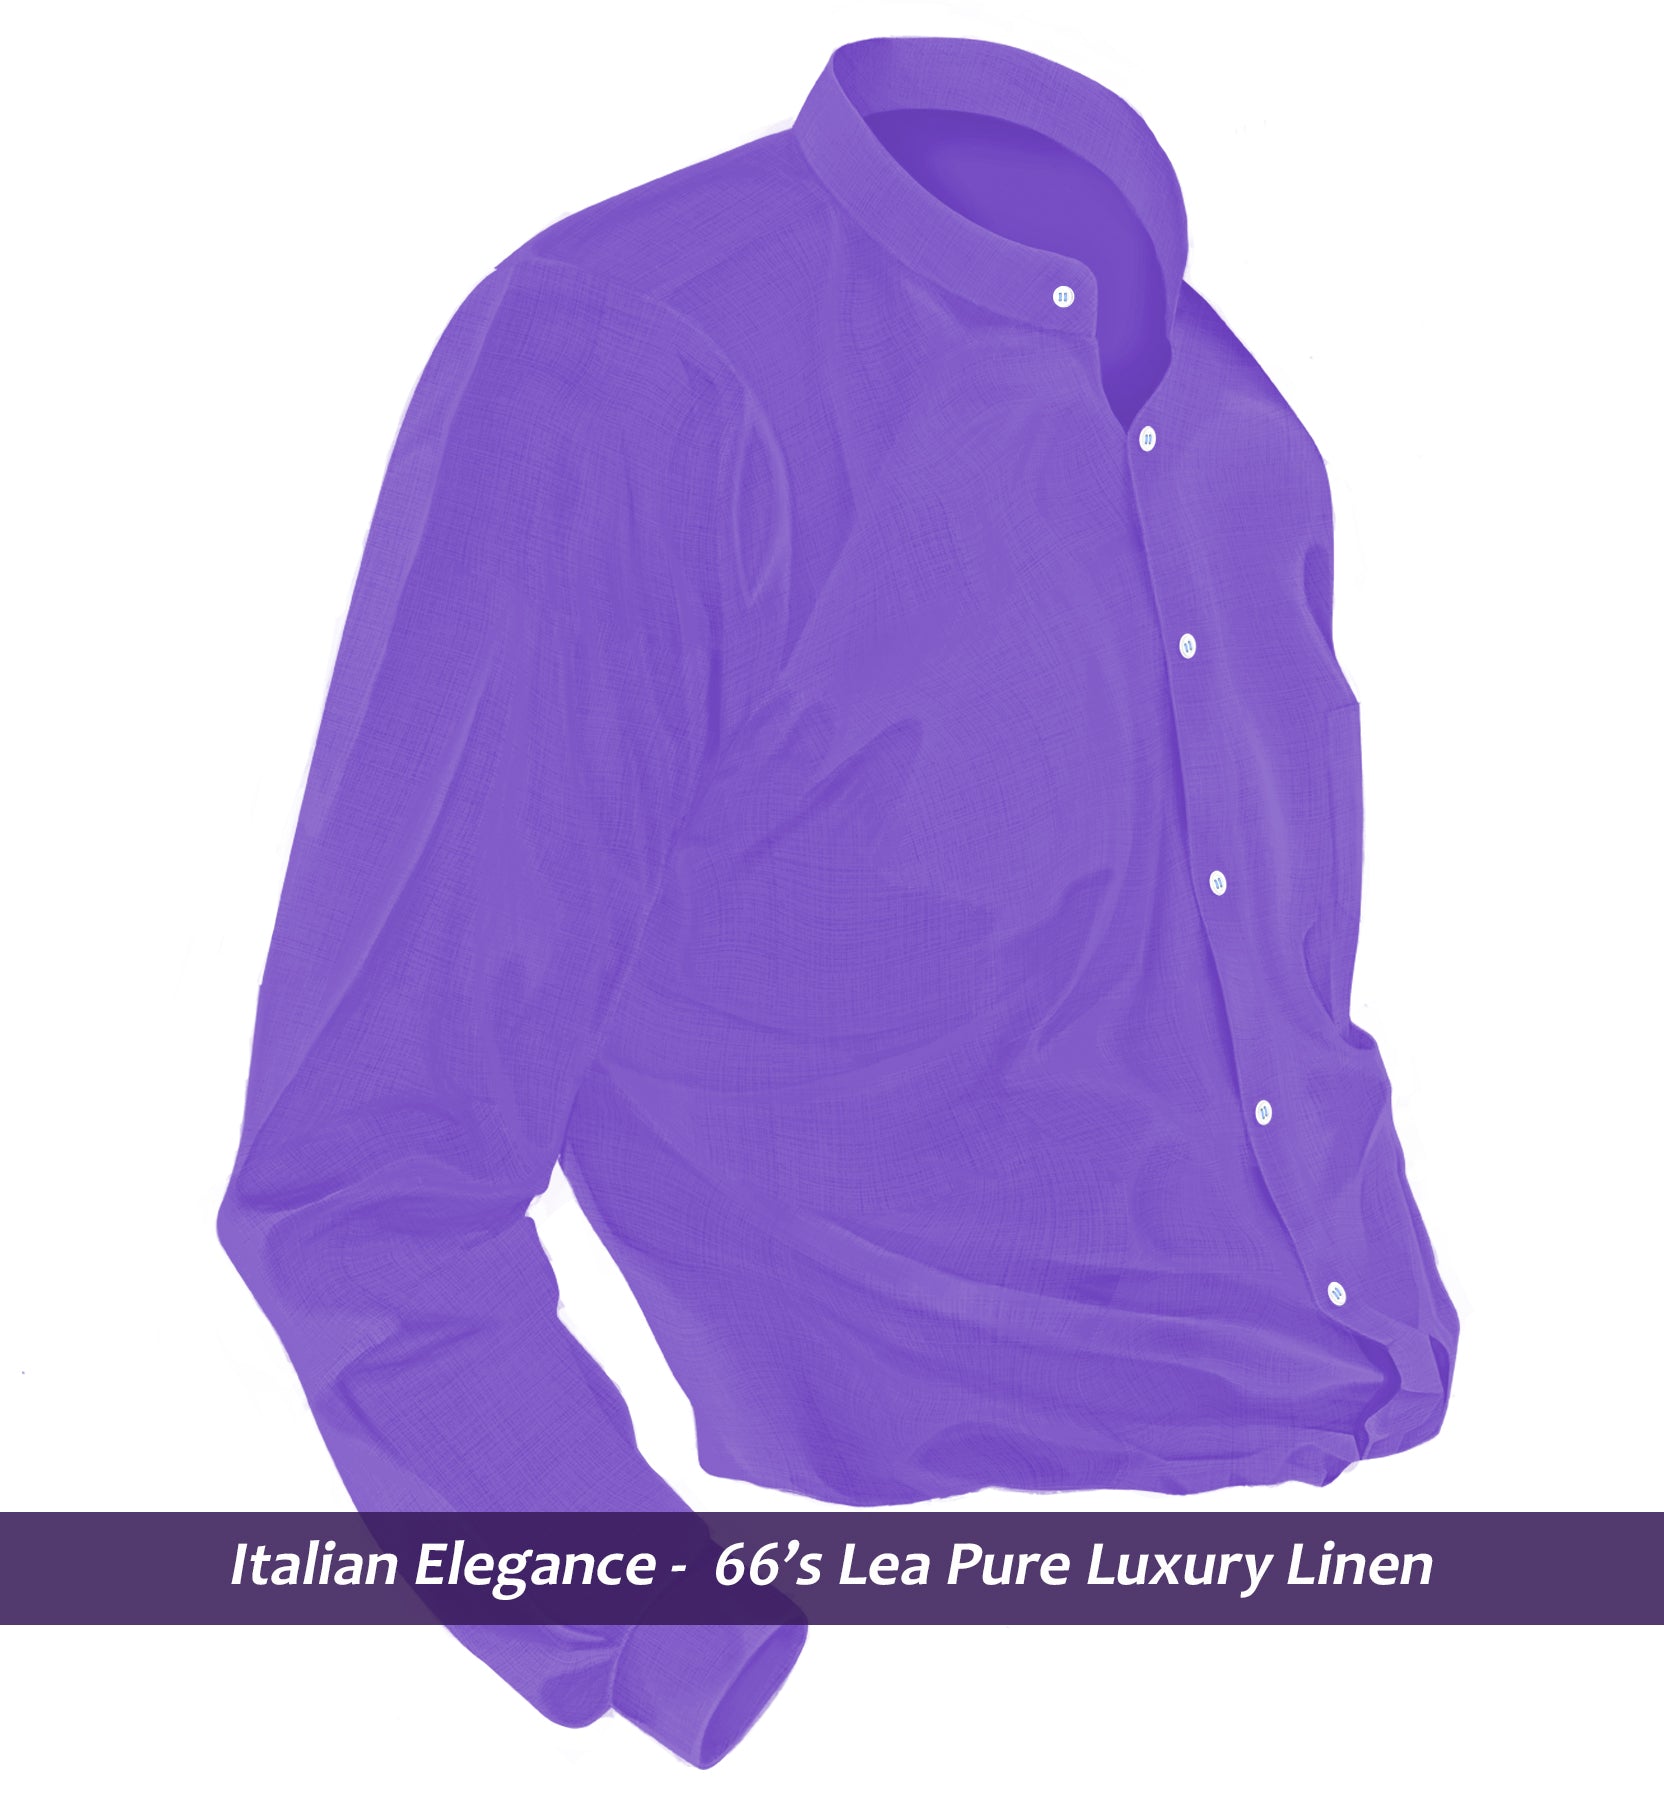 Lagos- Amethyst Solid Linen- Mandarin Collar- 66's Lea Pure Luxury Linen-Delivery from 2nd Dec